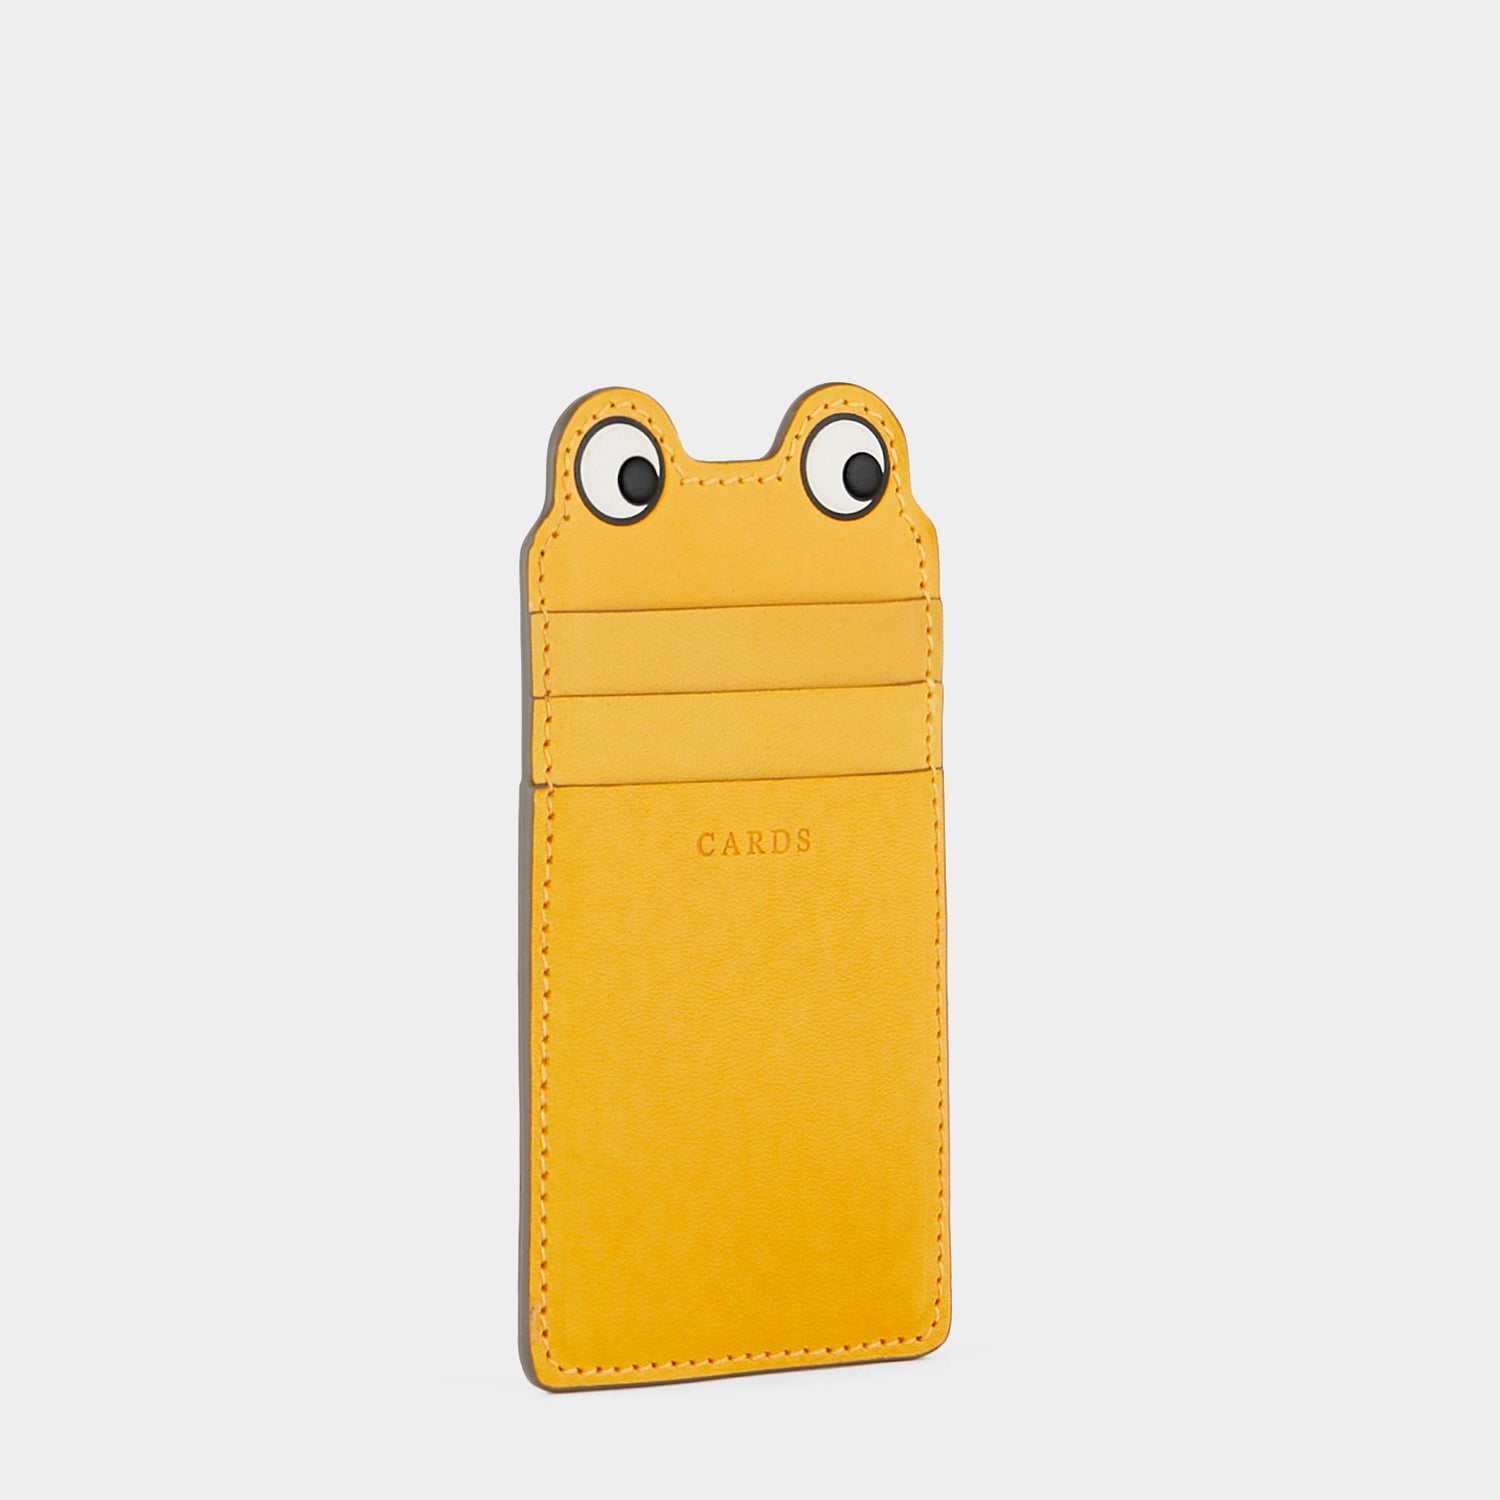 Return to Nature Frog Card Case